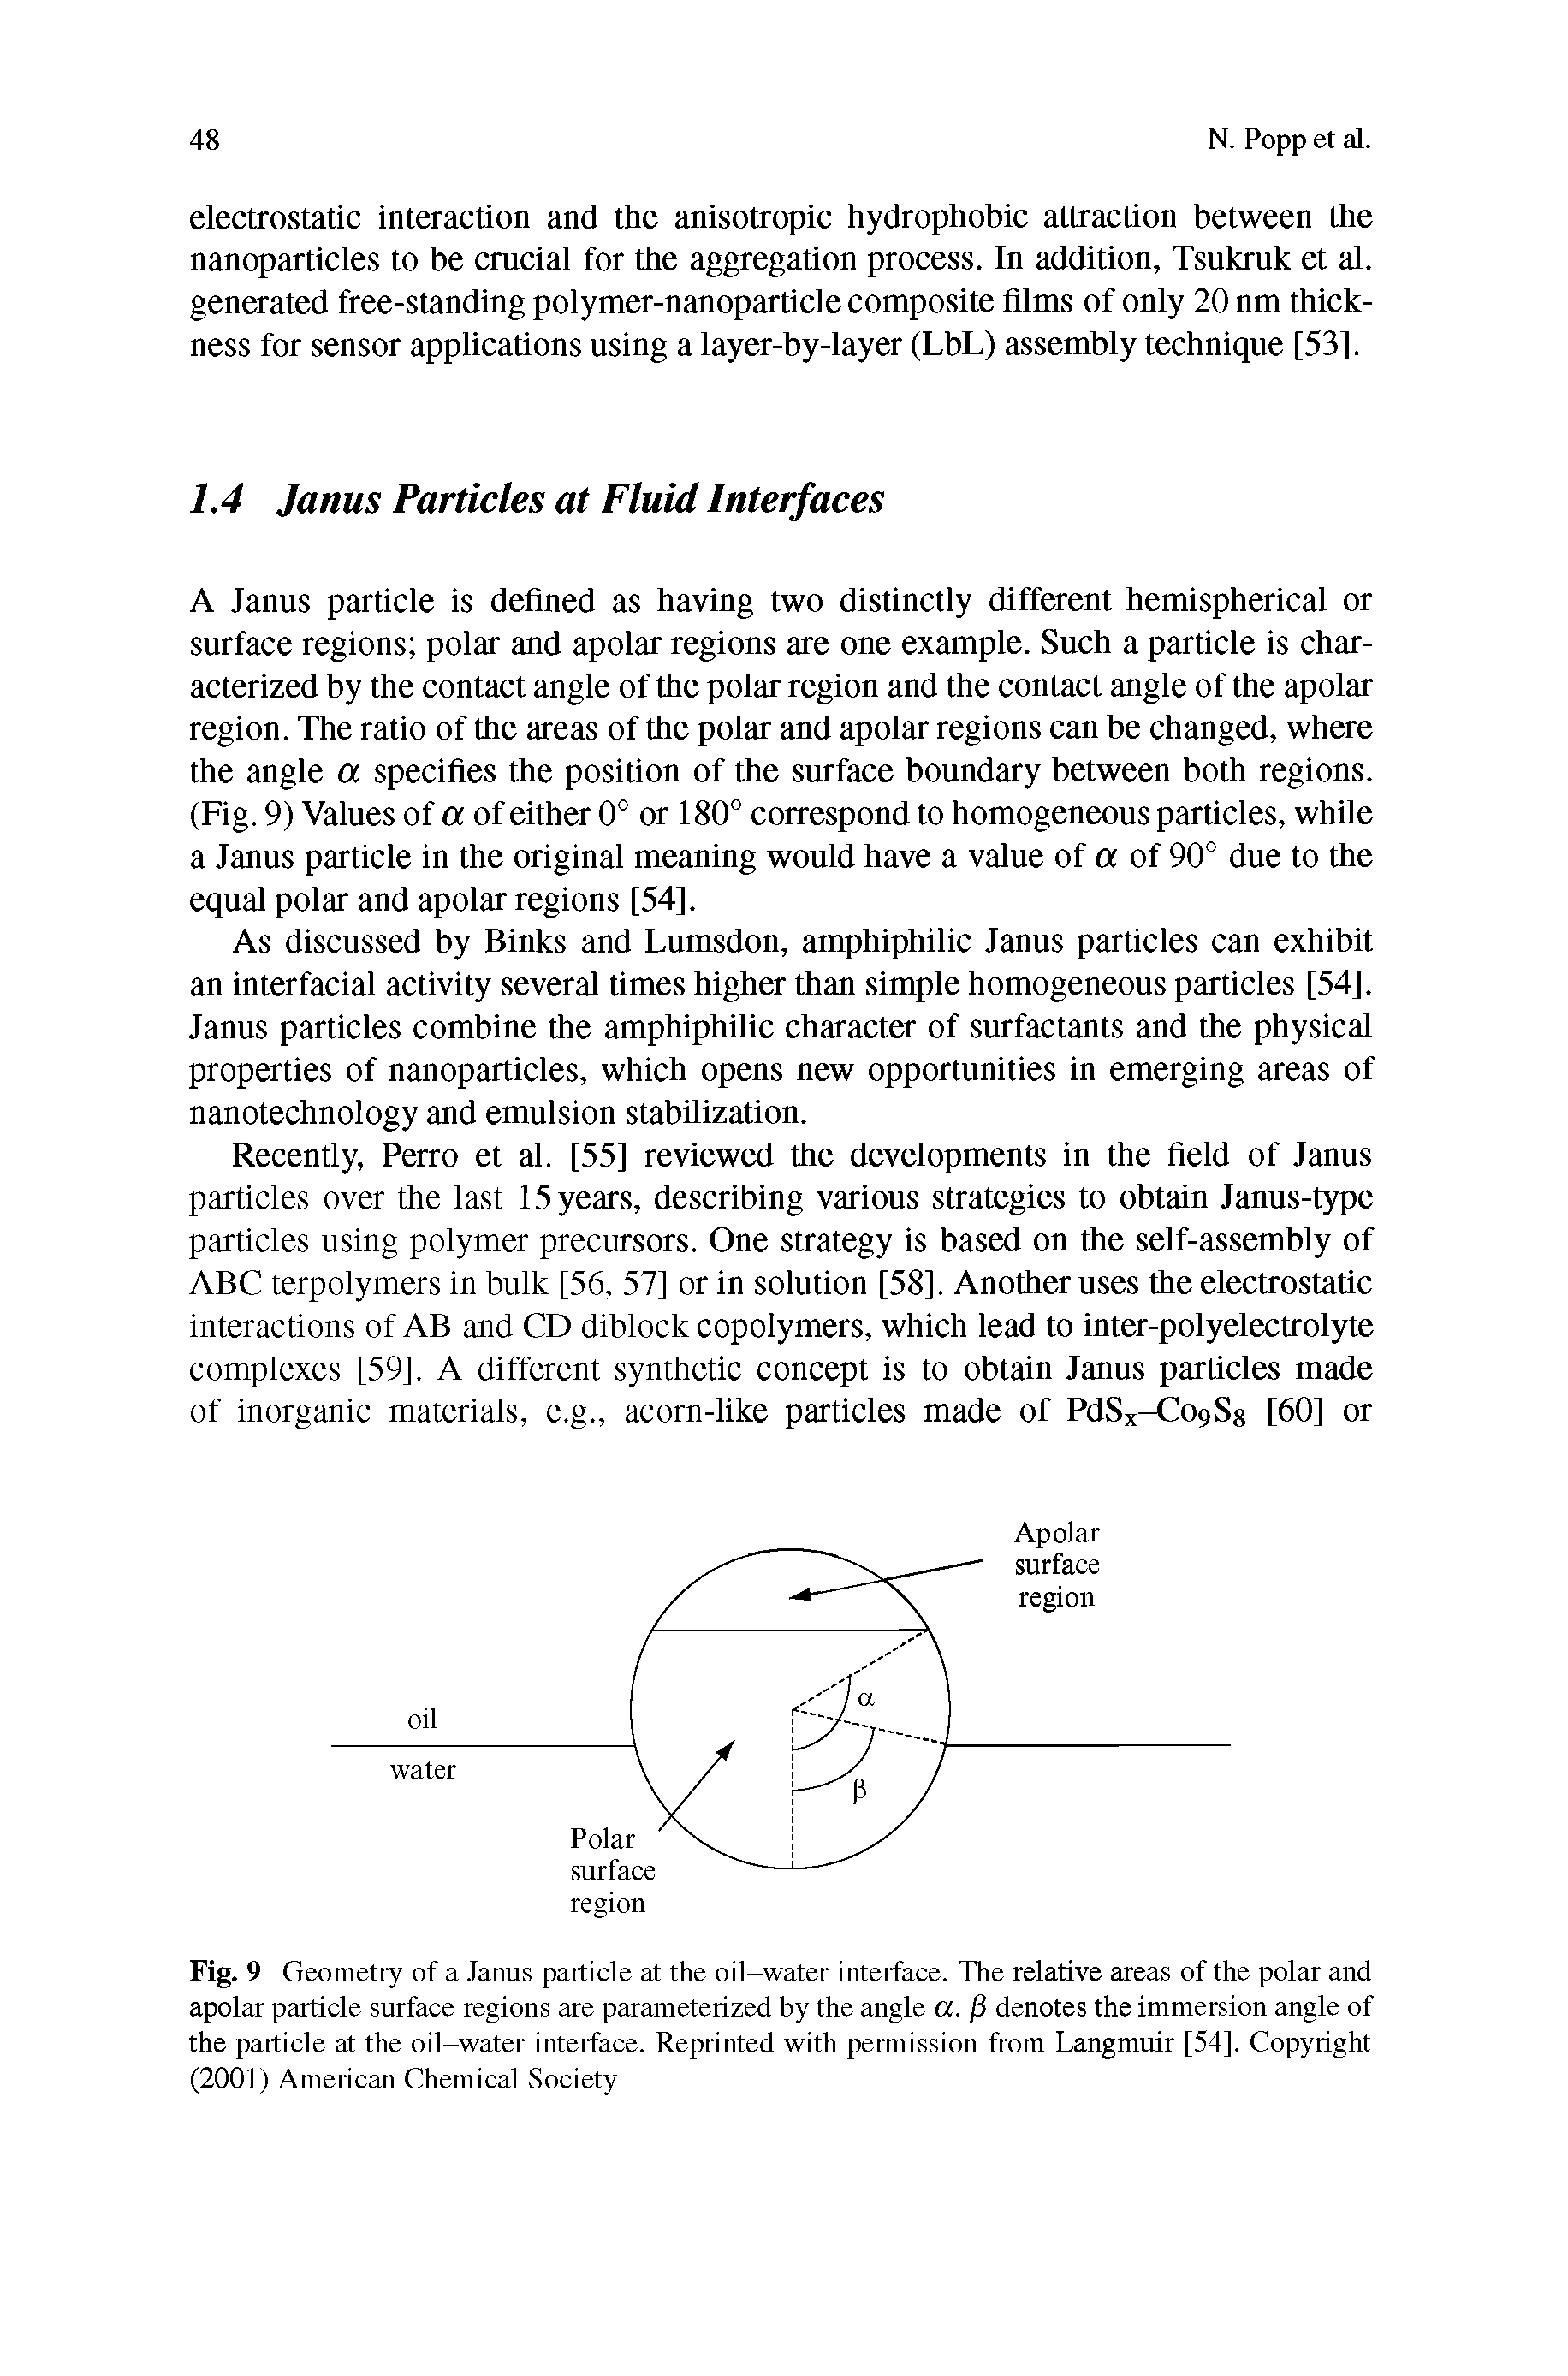 Fig. 9 Geometry of a Janus particle at the oil-water interface. The relative areas of the polar and apolar particle surface regions are parameterized by the angle a. J3 denotes the immersion angle of the particle at the oil-water interface. Reprinted with permission from Langmuir [54]. Copyright (2001) American Chemical Society...